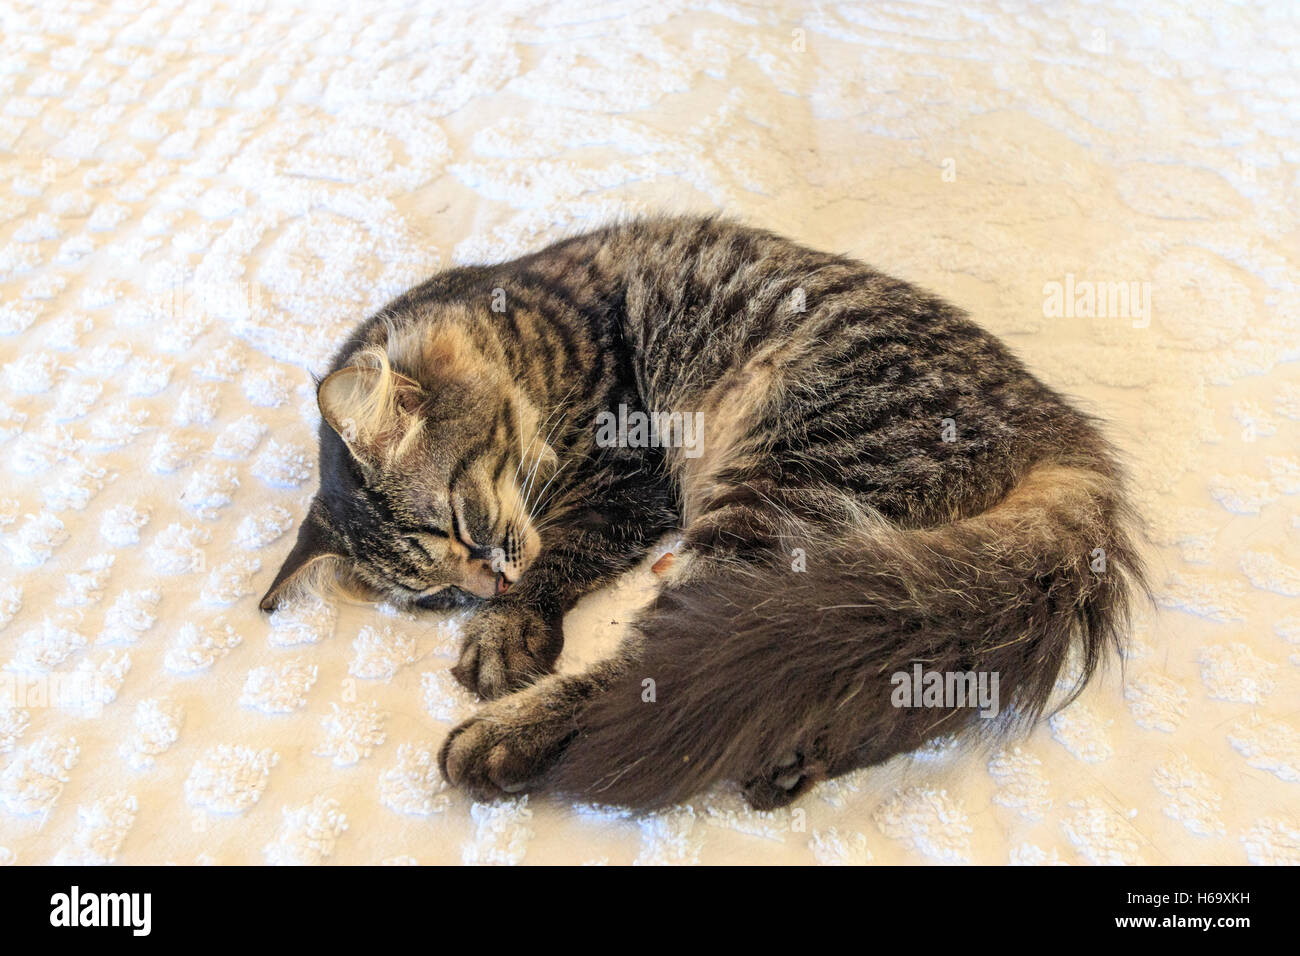 One of the dozens of six toed cats that now live in the former Hemingway home which has been turned into a museum in Key West Stock Photo